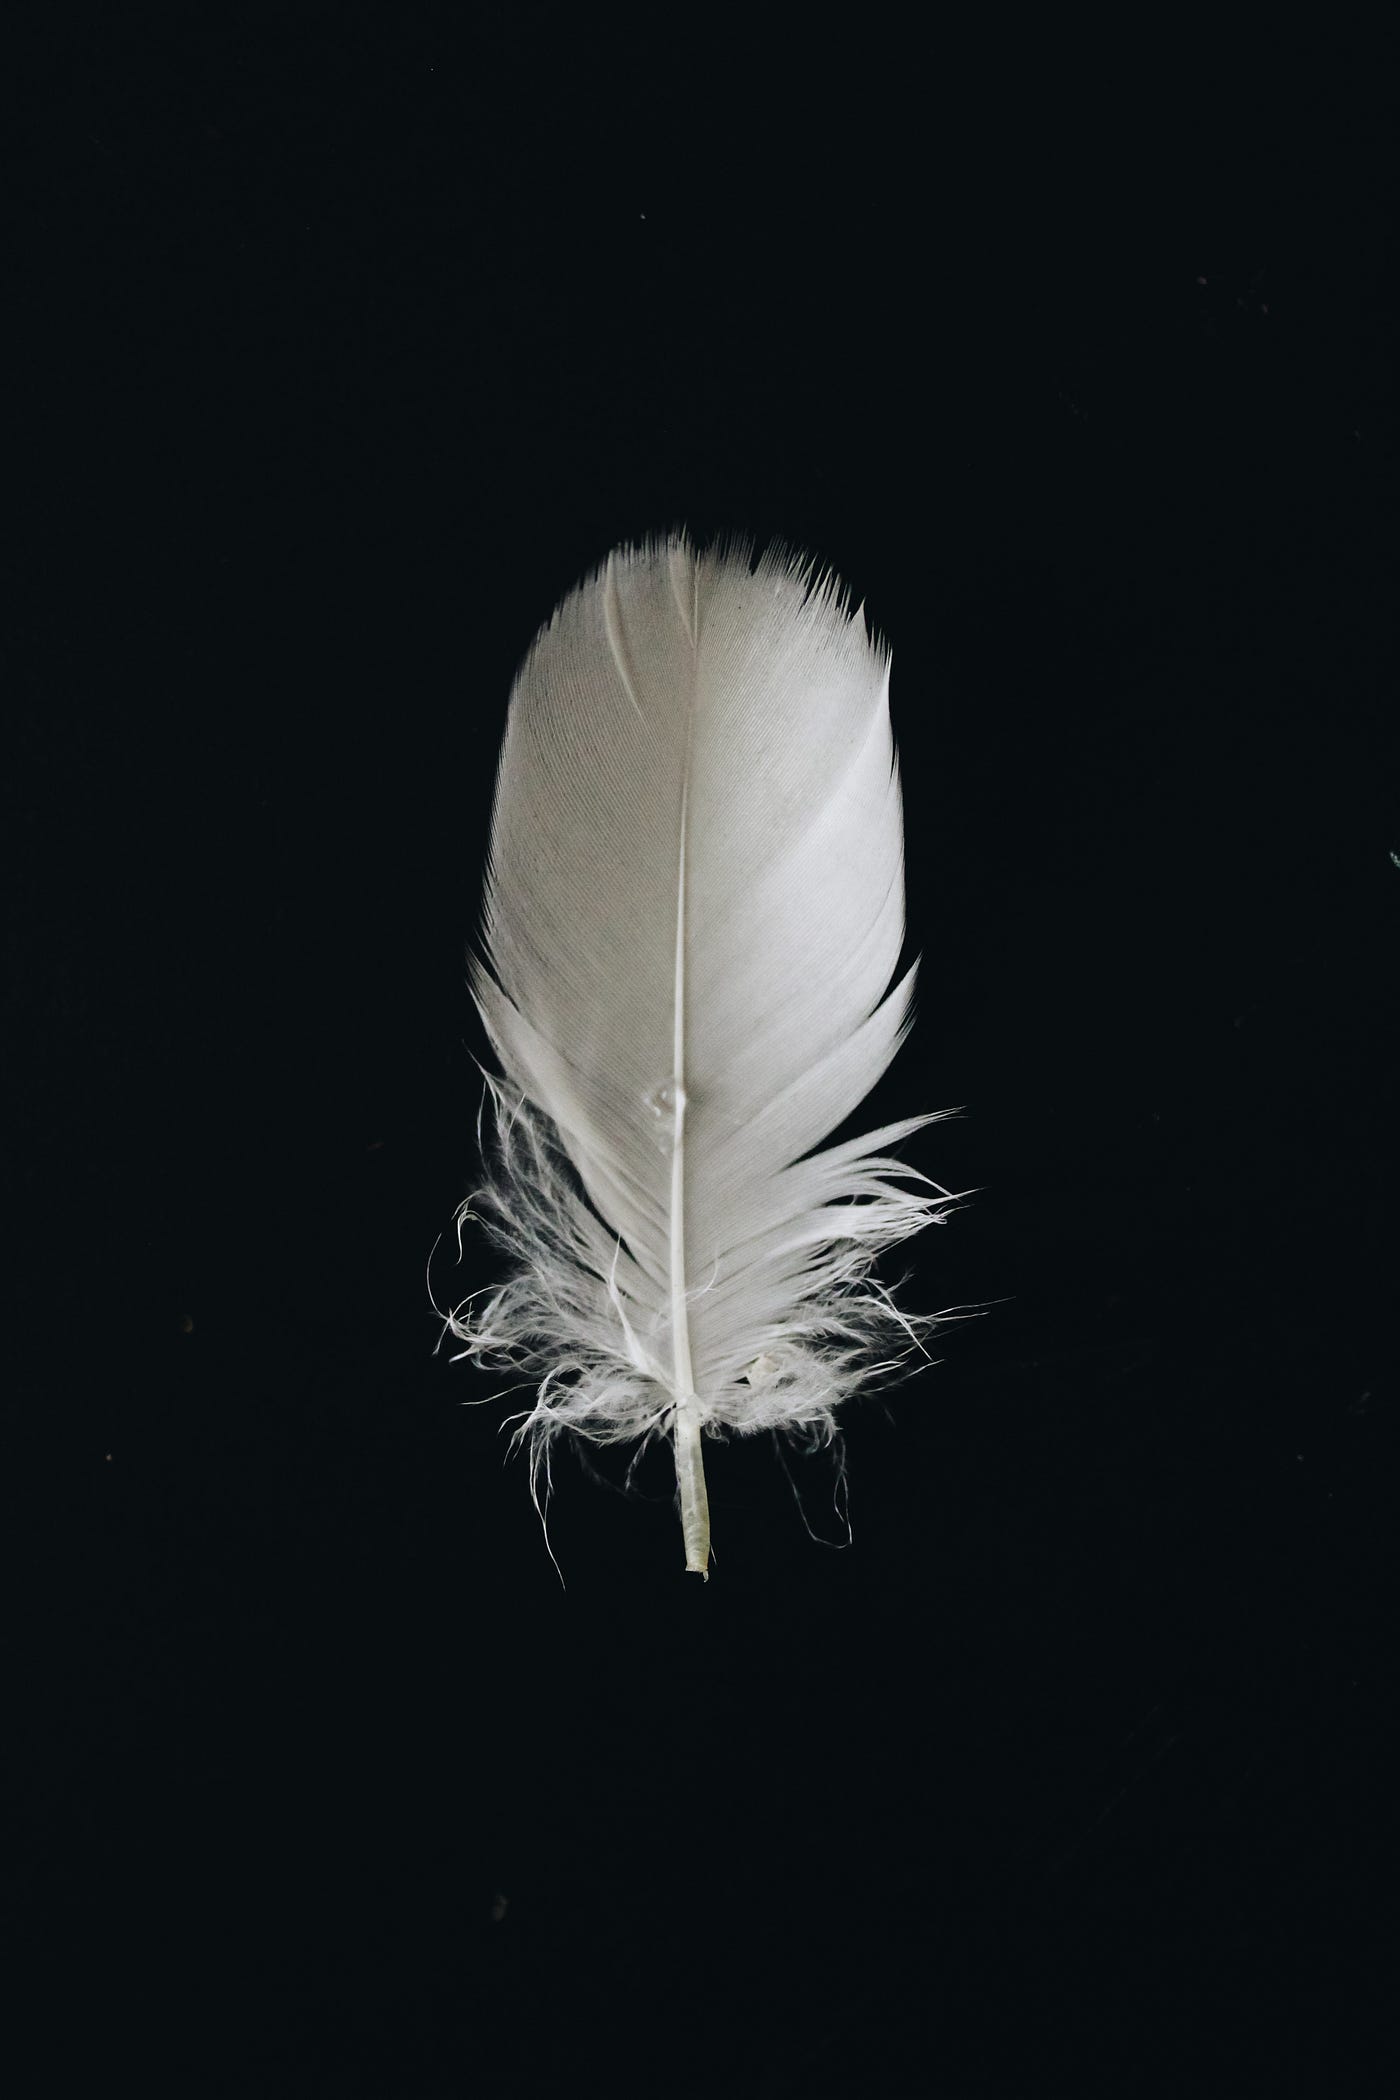 Angel expert says white feathers are a sign from beyond to offer hope and  encouragement